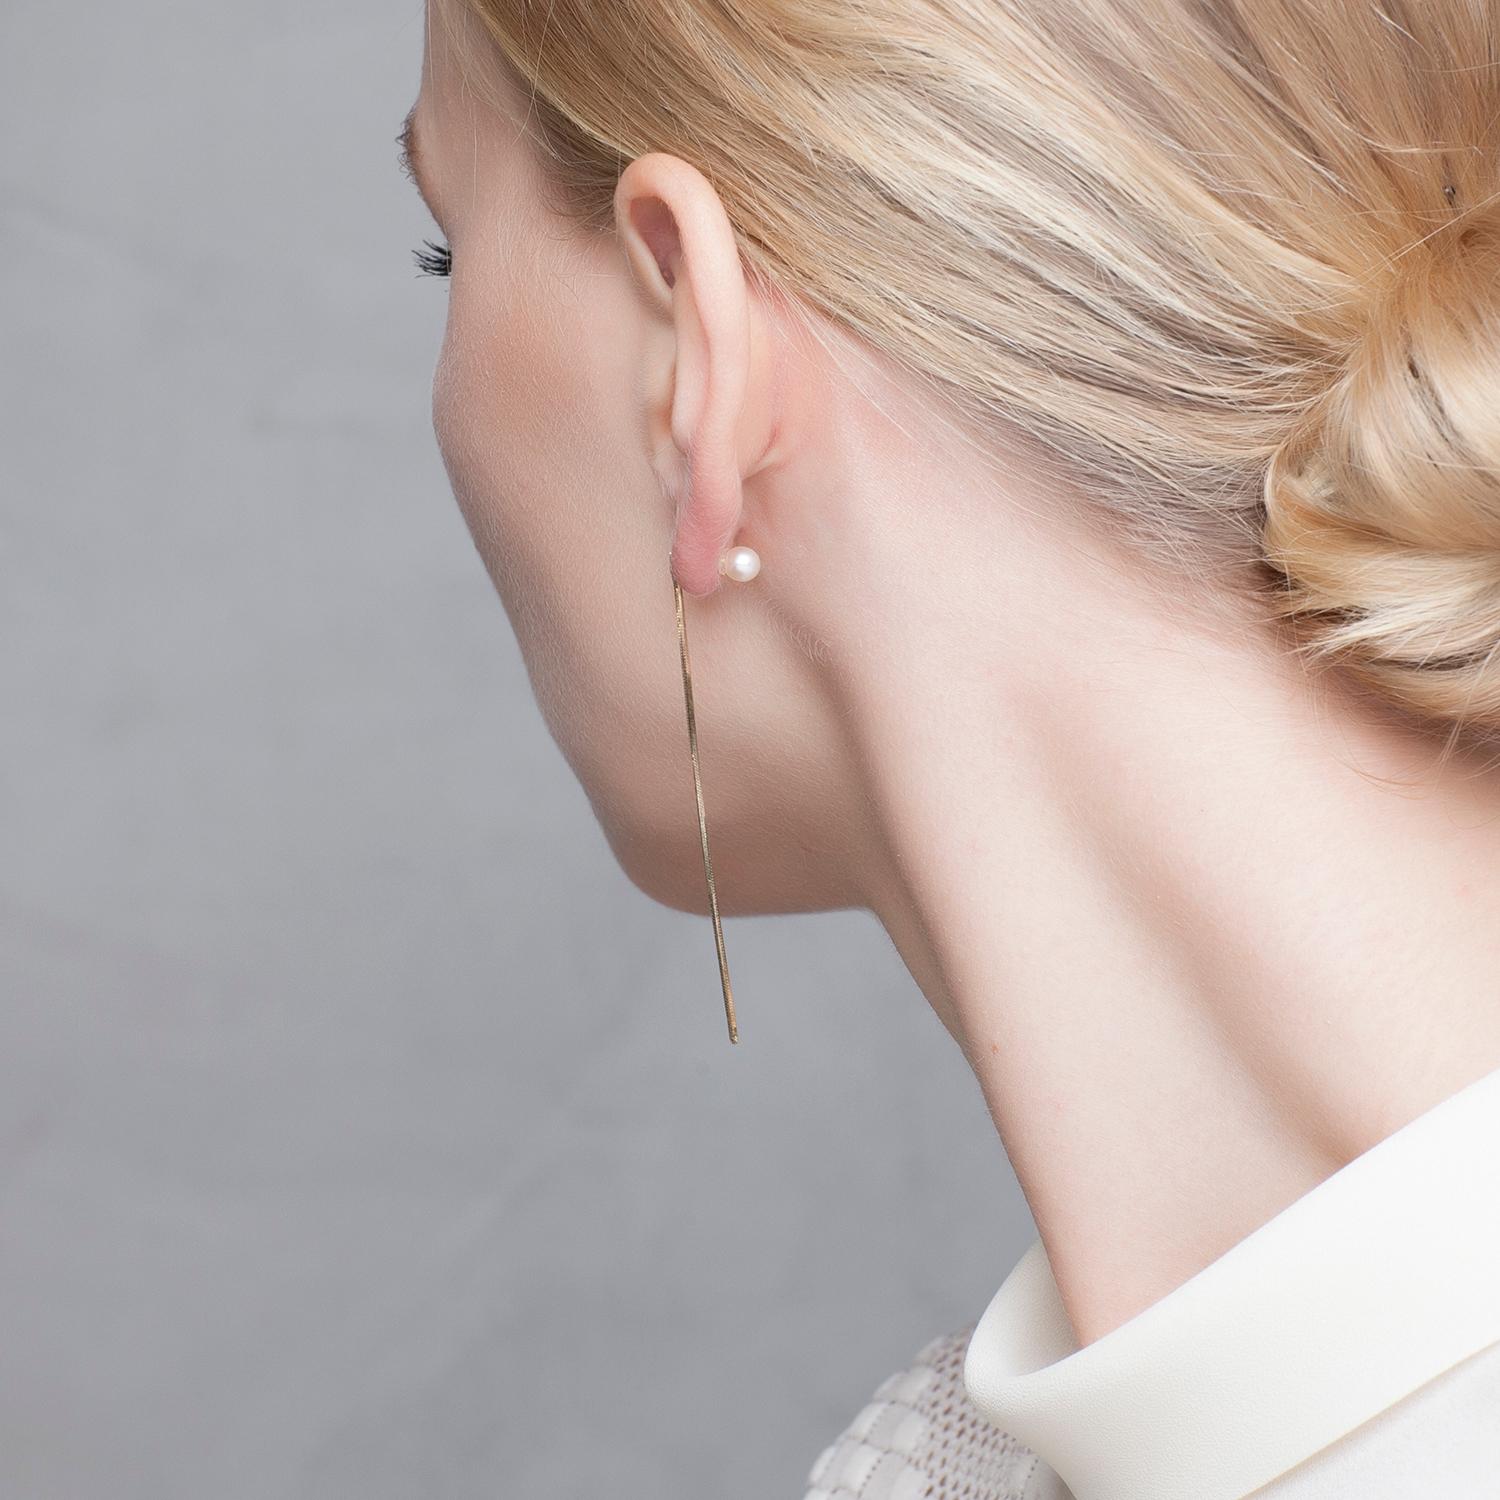 Balancing its design between minimalism and avant-garde, Iosselliani captures the essence of elegance with this 9 Karat yellow gold  thread with a freshwater pearl stopper. Iosselliani has made a pair with a freshwater pearl stud aside. Pearls